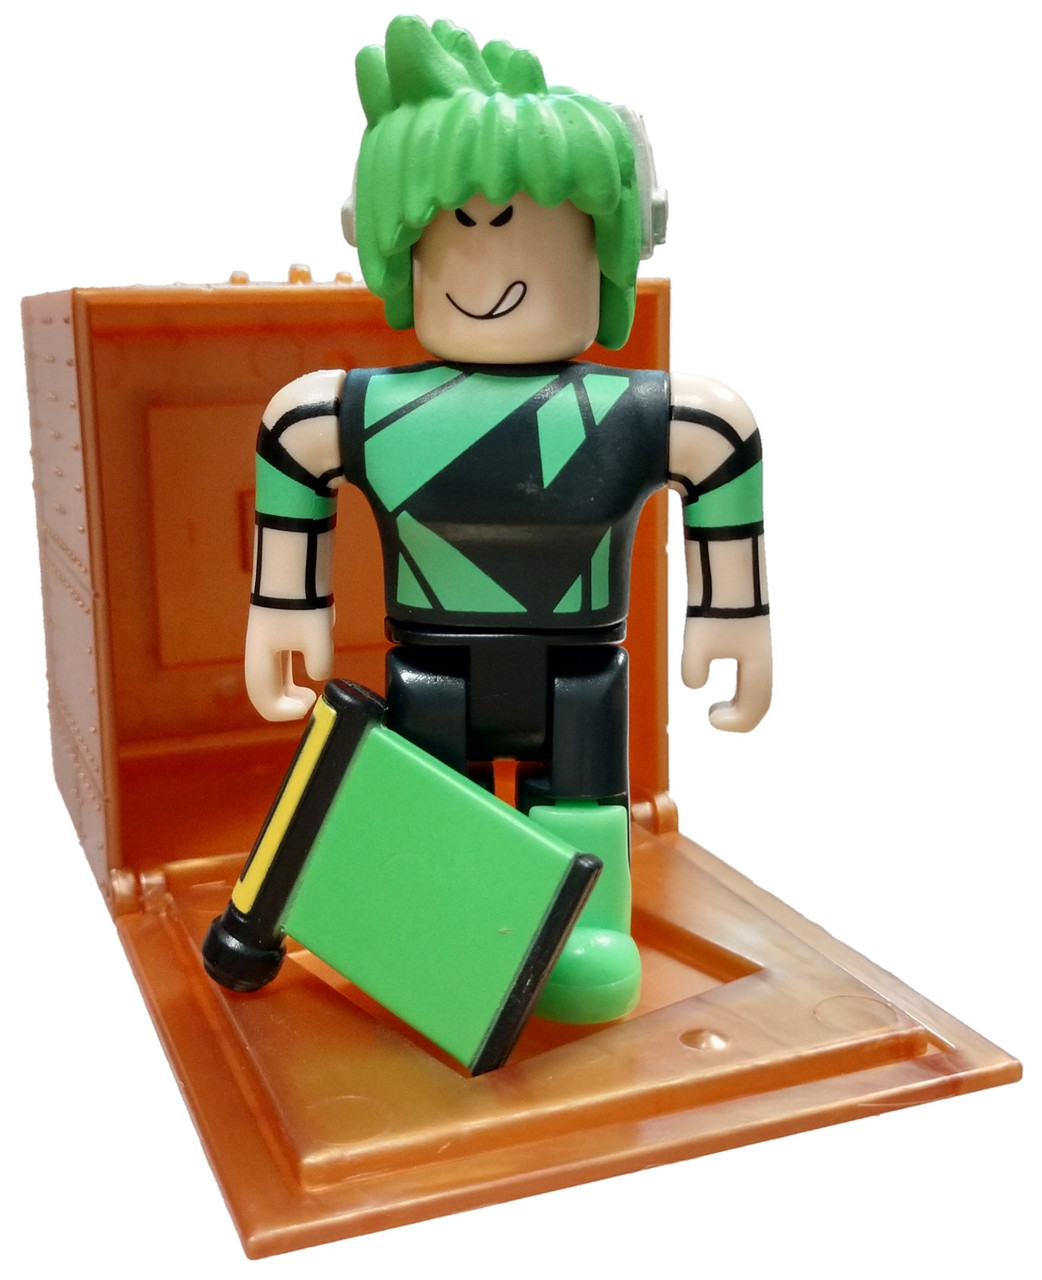 Roblox Series 8 Texting Simulator Future Tech Boy 3 Mini Figure With Cube And Online Code Loose Jazwares Toywiz - roblox the neighborhood boys codes